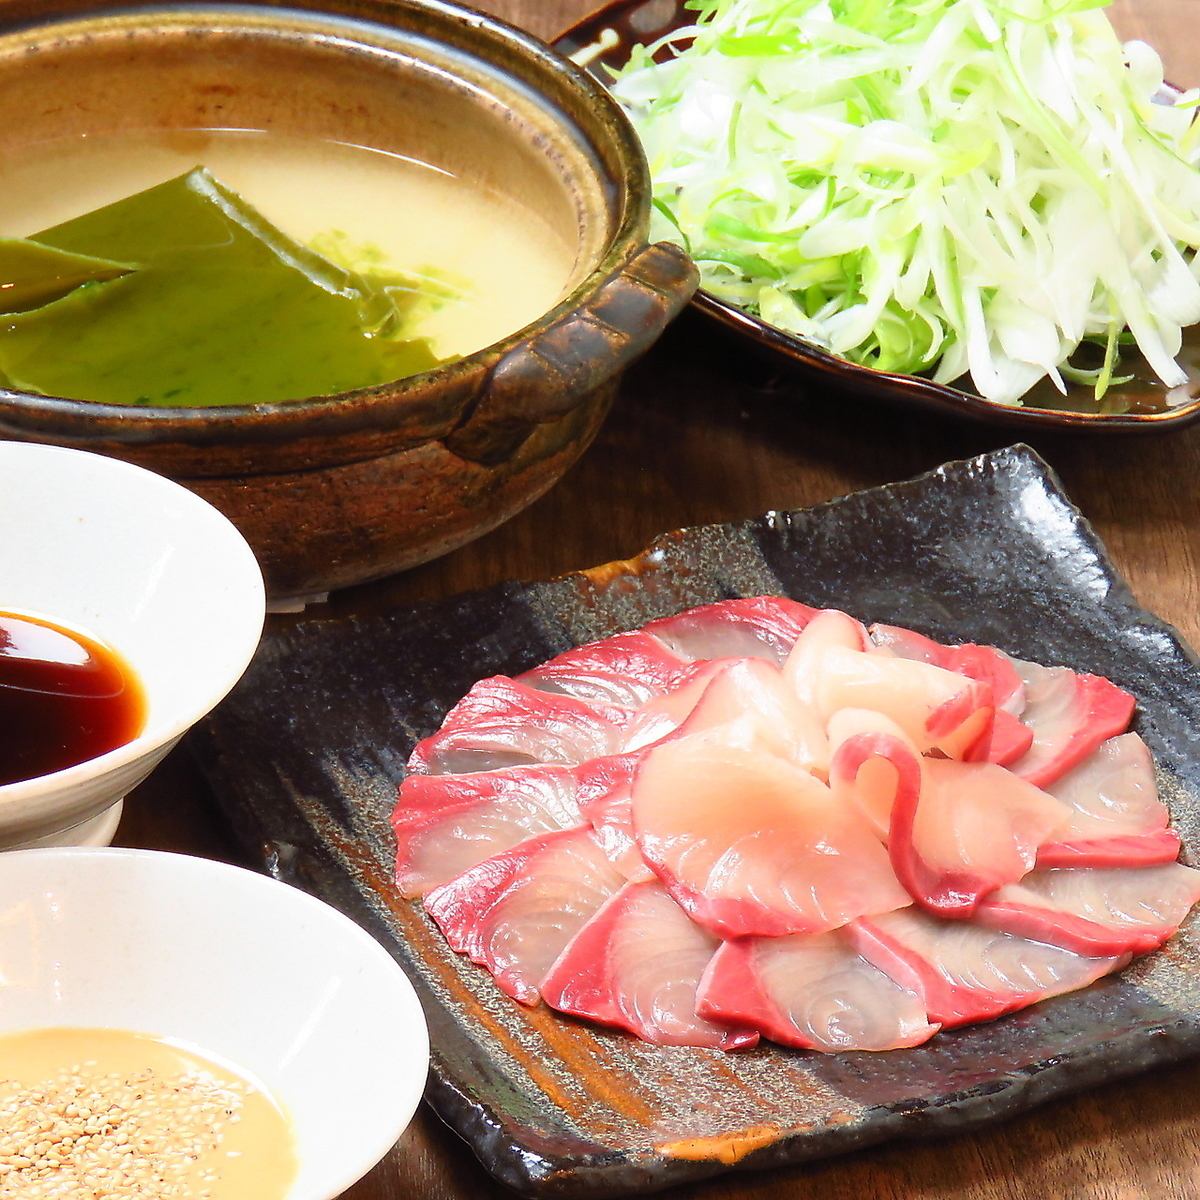 Our fish yakiniku made with fresh fish is a must-try!